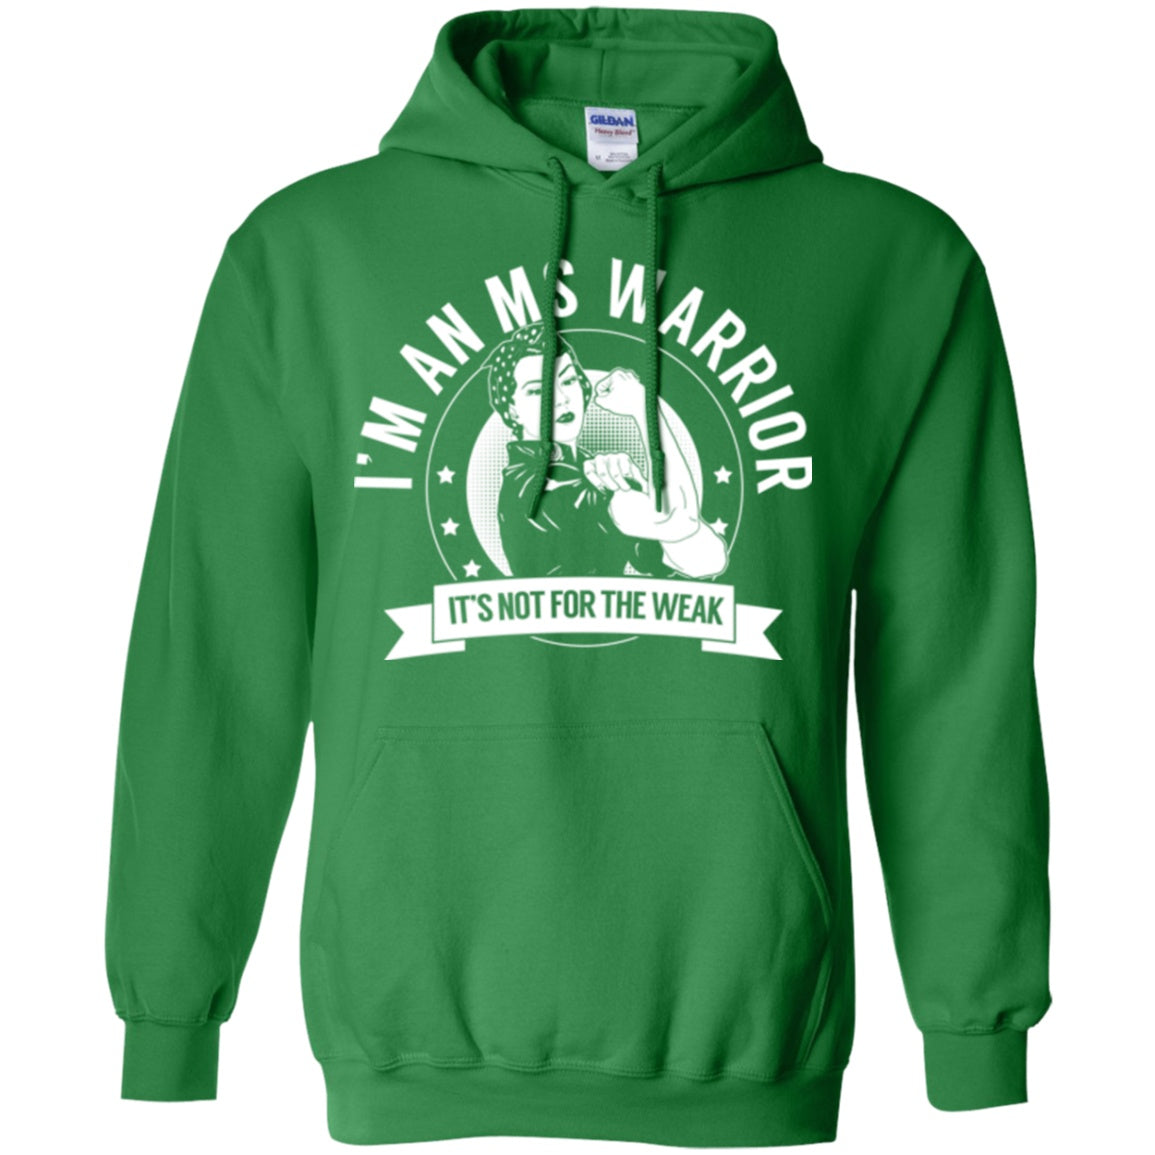 MS Warrior Not For The Weak Pullover Hoodie 8 oz. - The Unchargeables